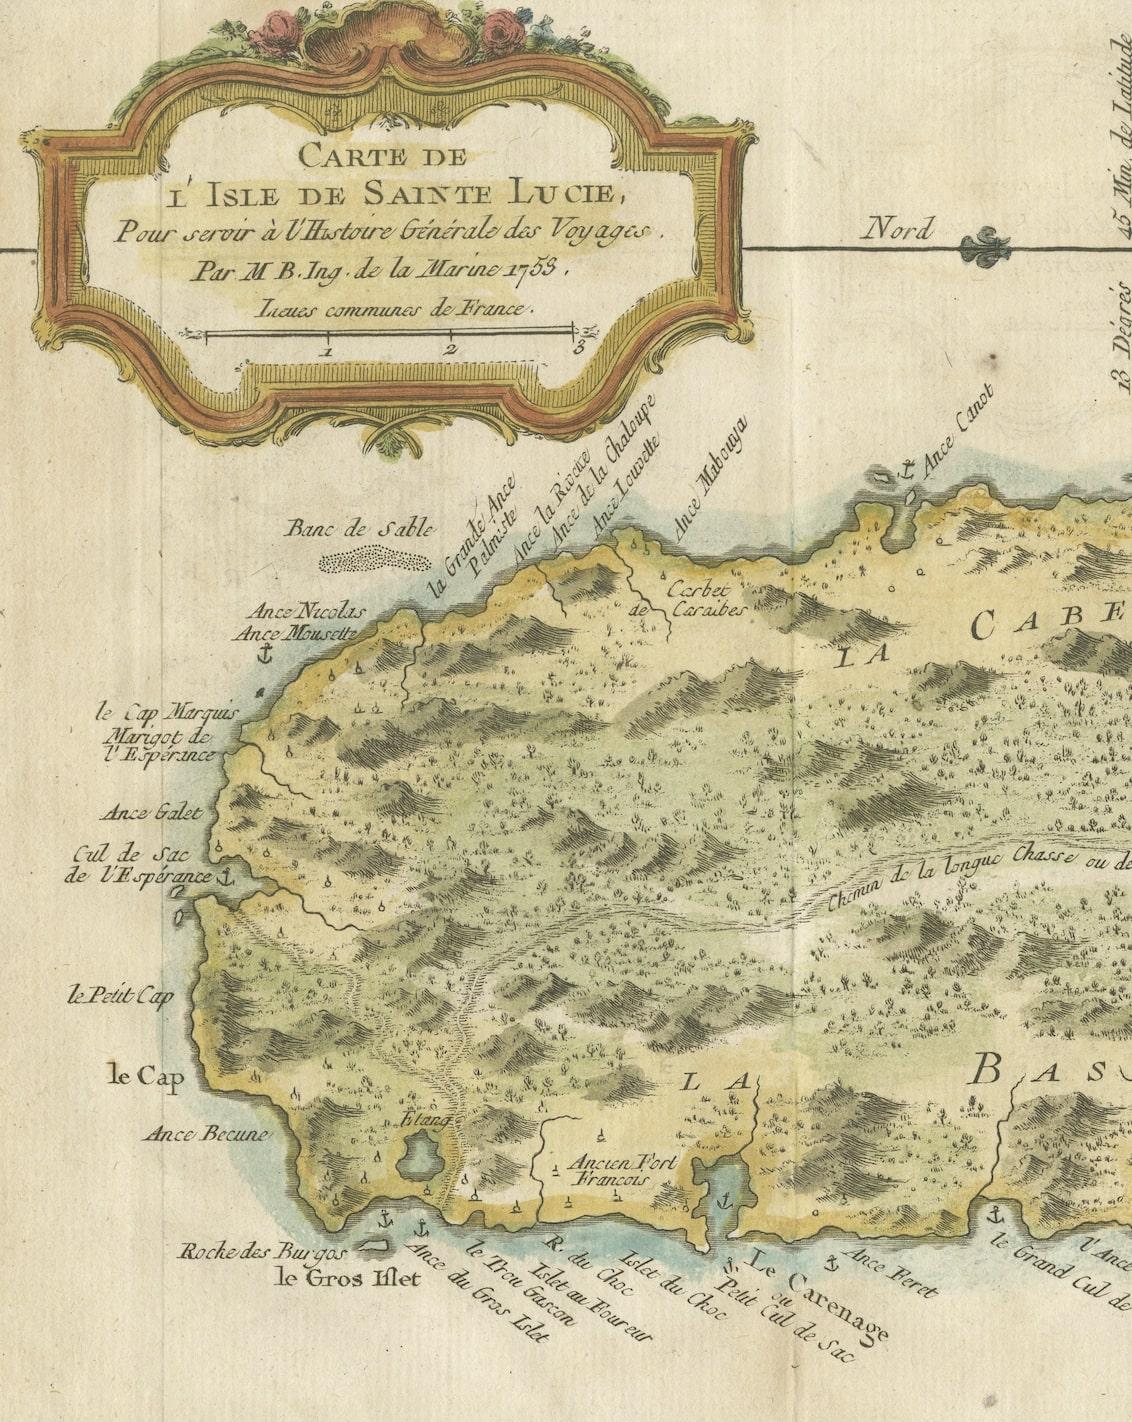 Engraved Map by Bellin of Saint Lucia or Sainte Lucie in the West Indies, 1764 4